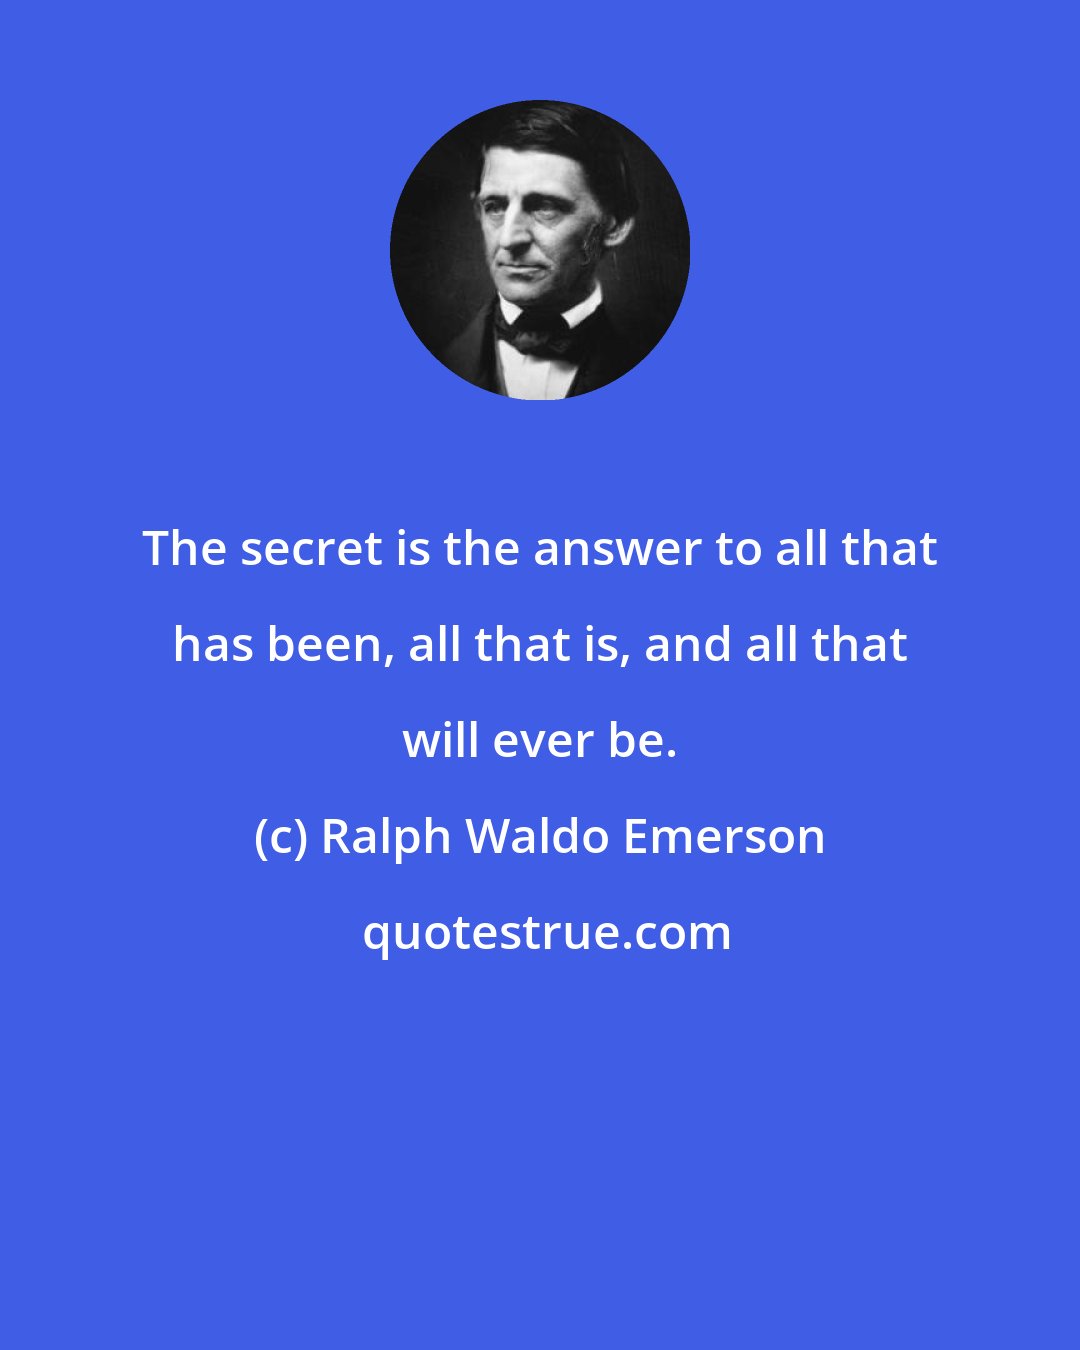 Ralph Waldo Emerson: The secret is the answer to all that has been, all that is, and all that will ever be.